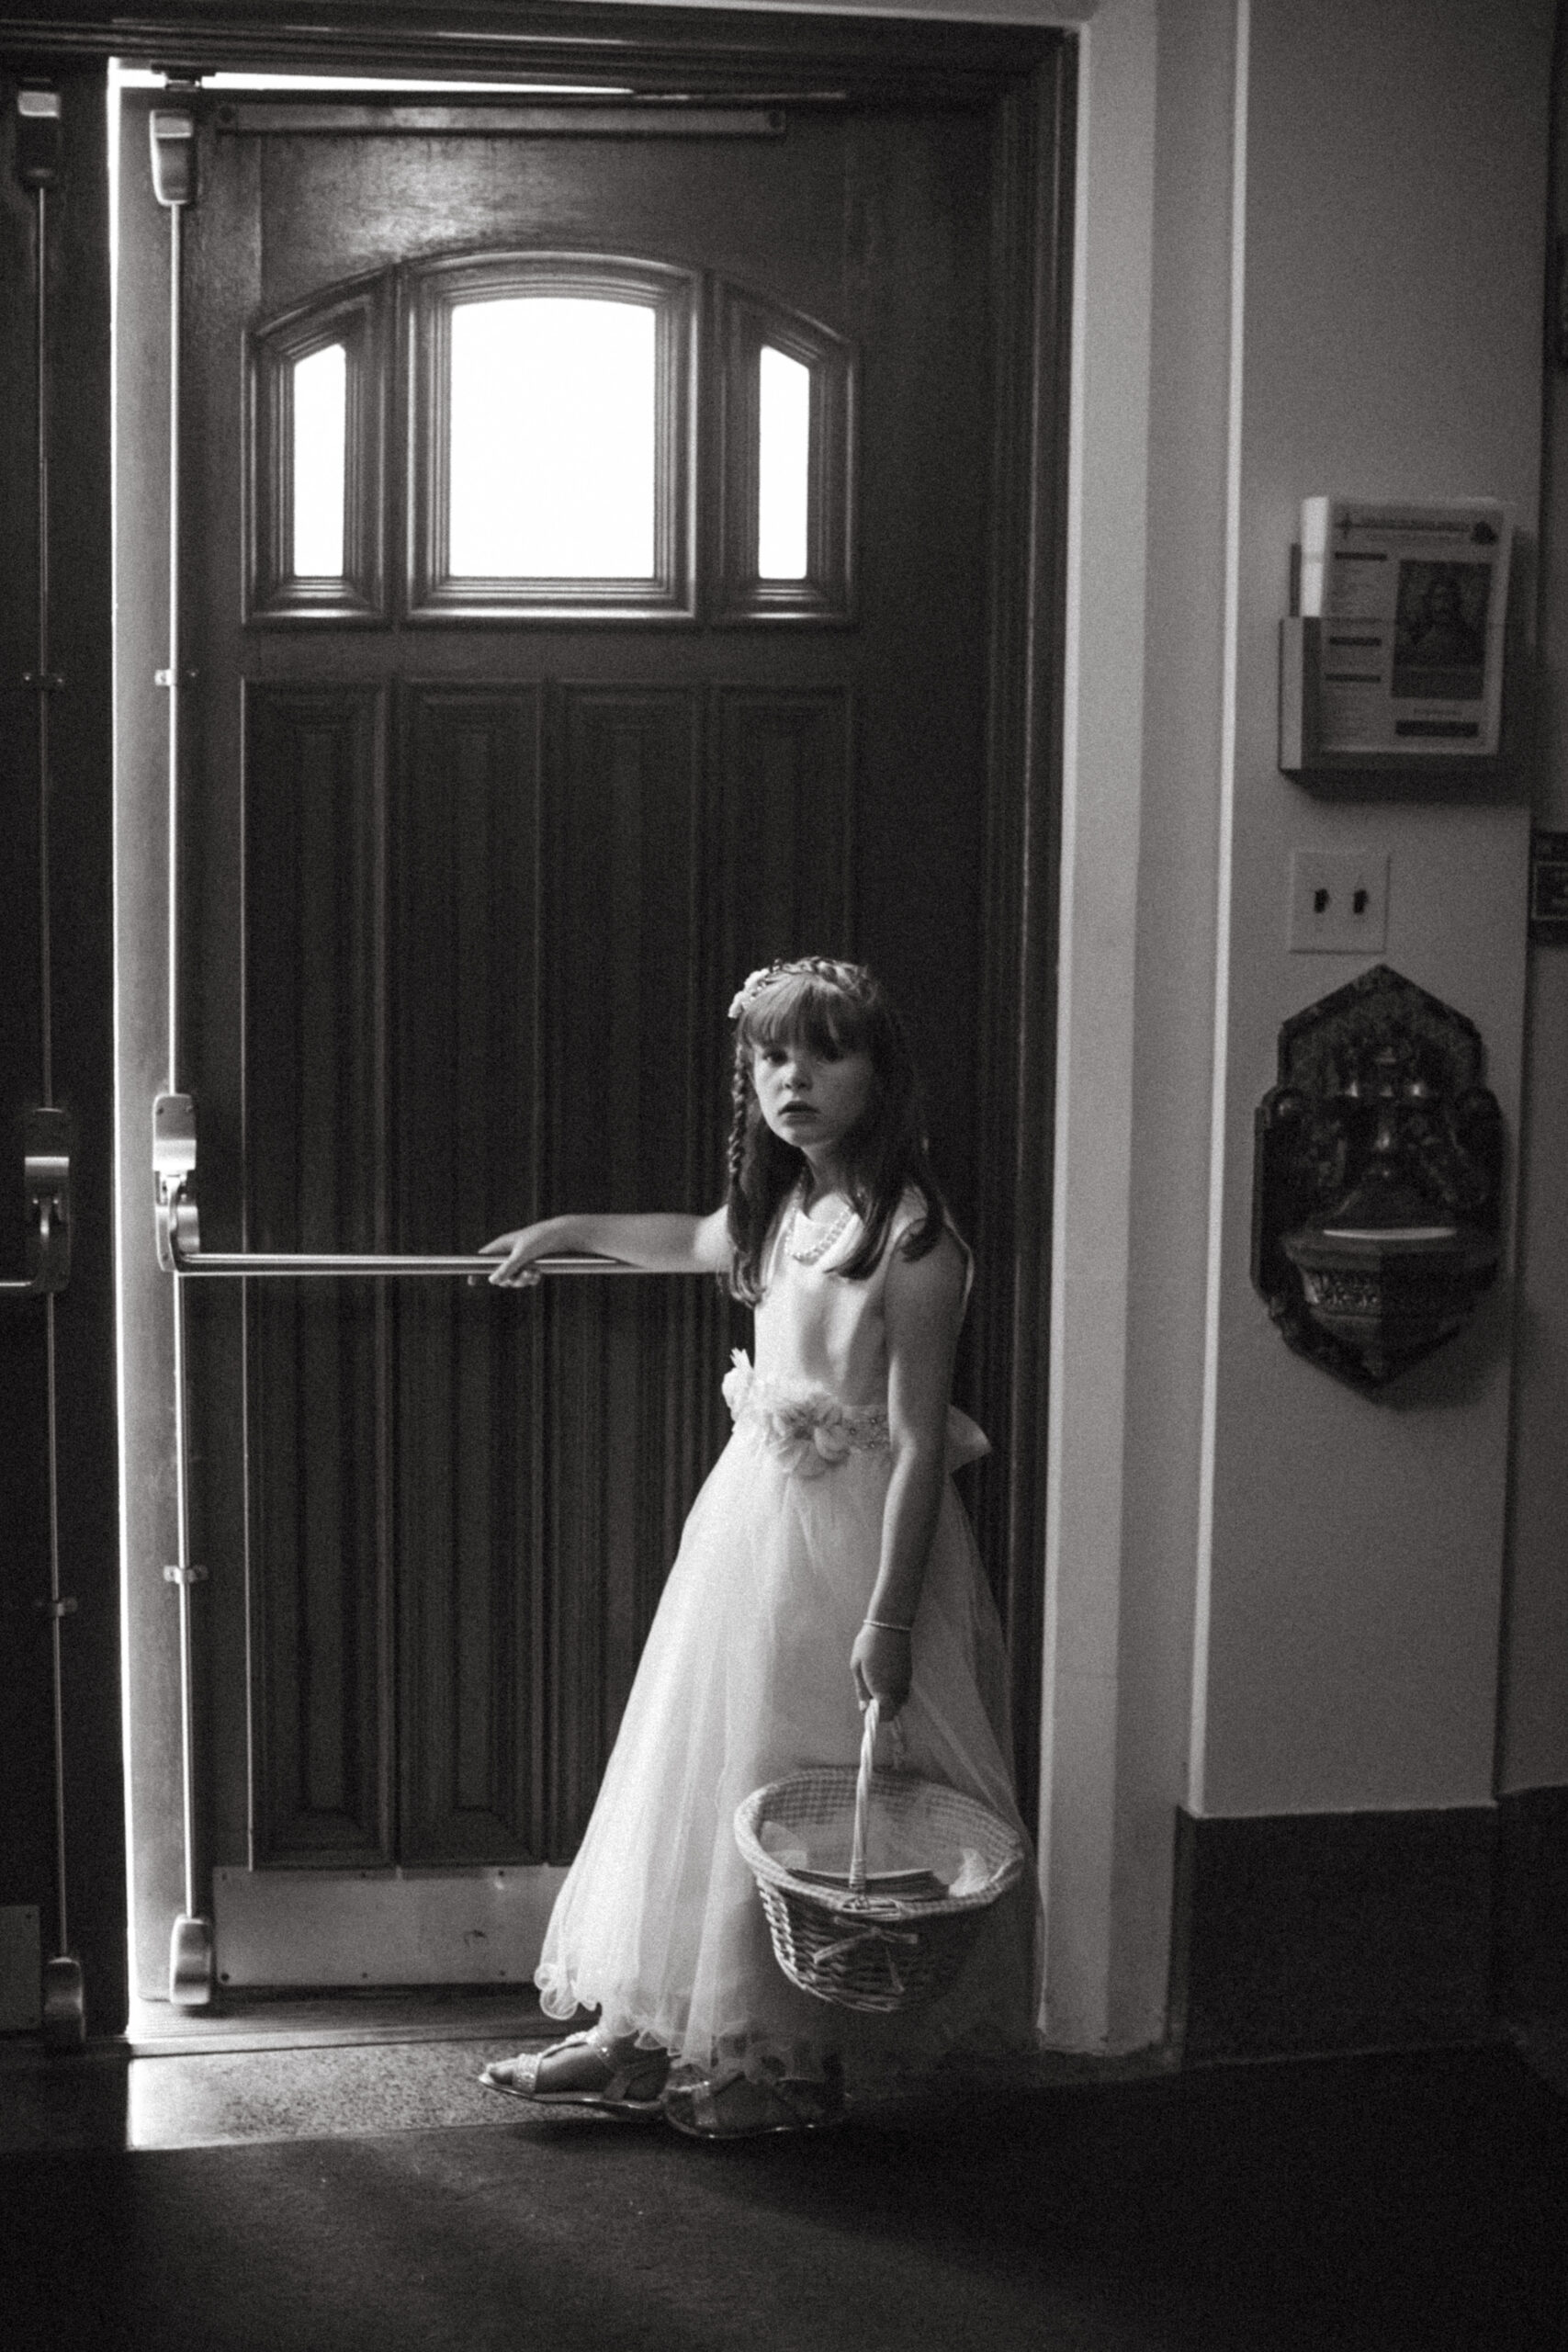 Flower girl poses with her basket at the church door as she awaits the start of the ceremony 